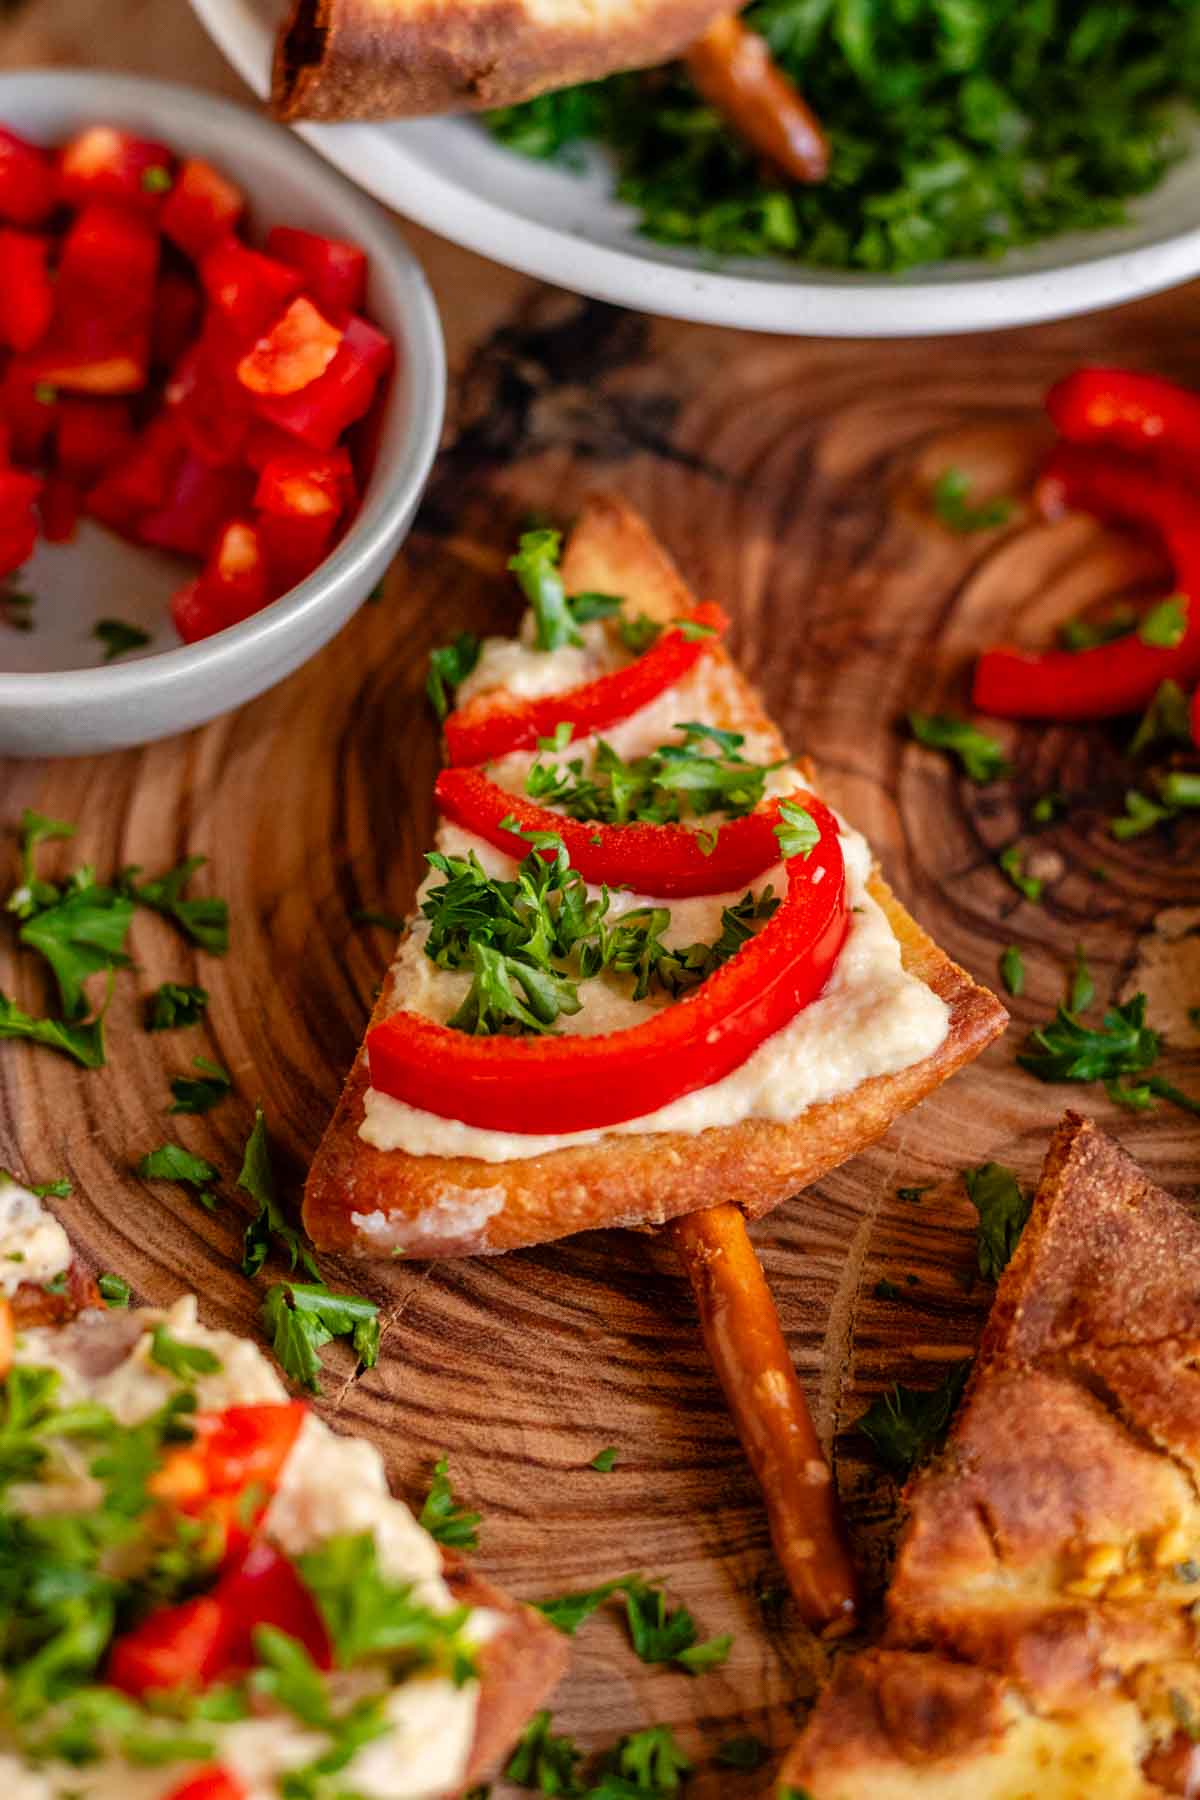 Pita chips decorated like Christmas trees with red pepper, parsley, and a pretzel as a trunk.